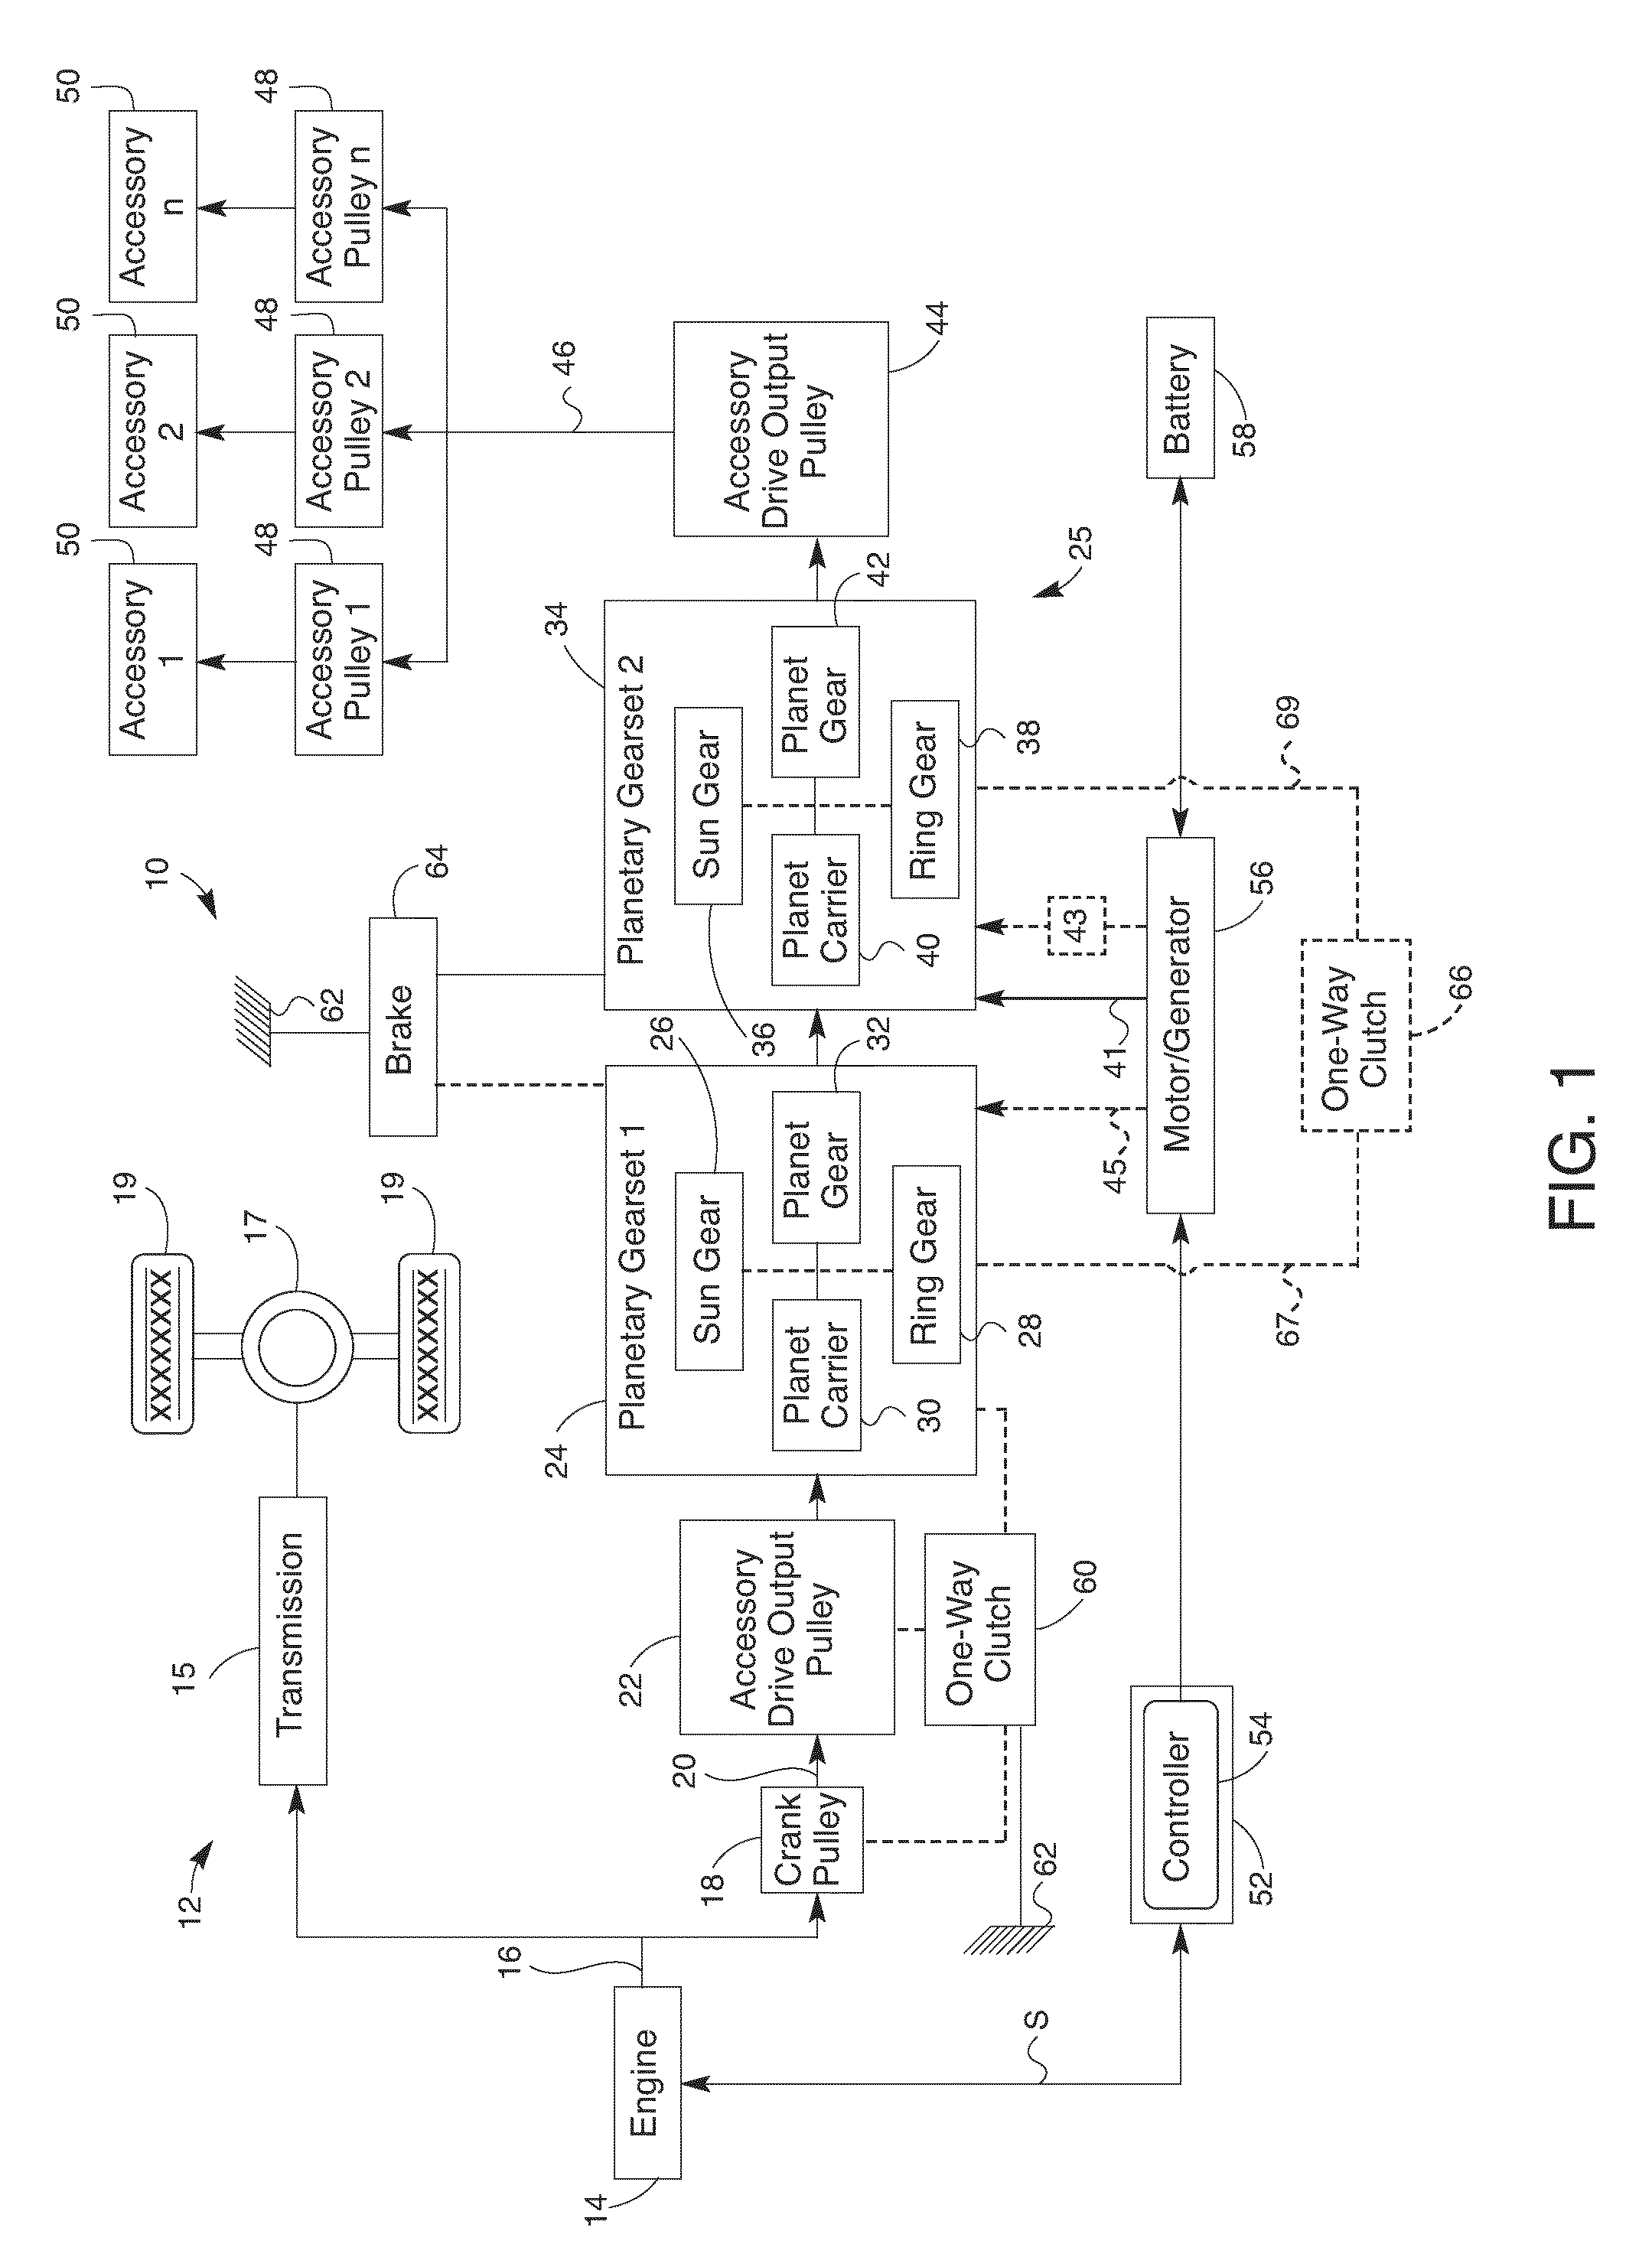 Variable-speed motor-generator accessory drive system